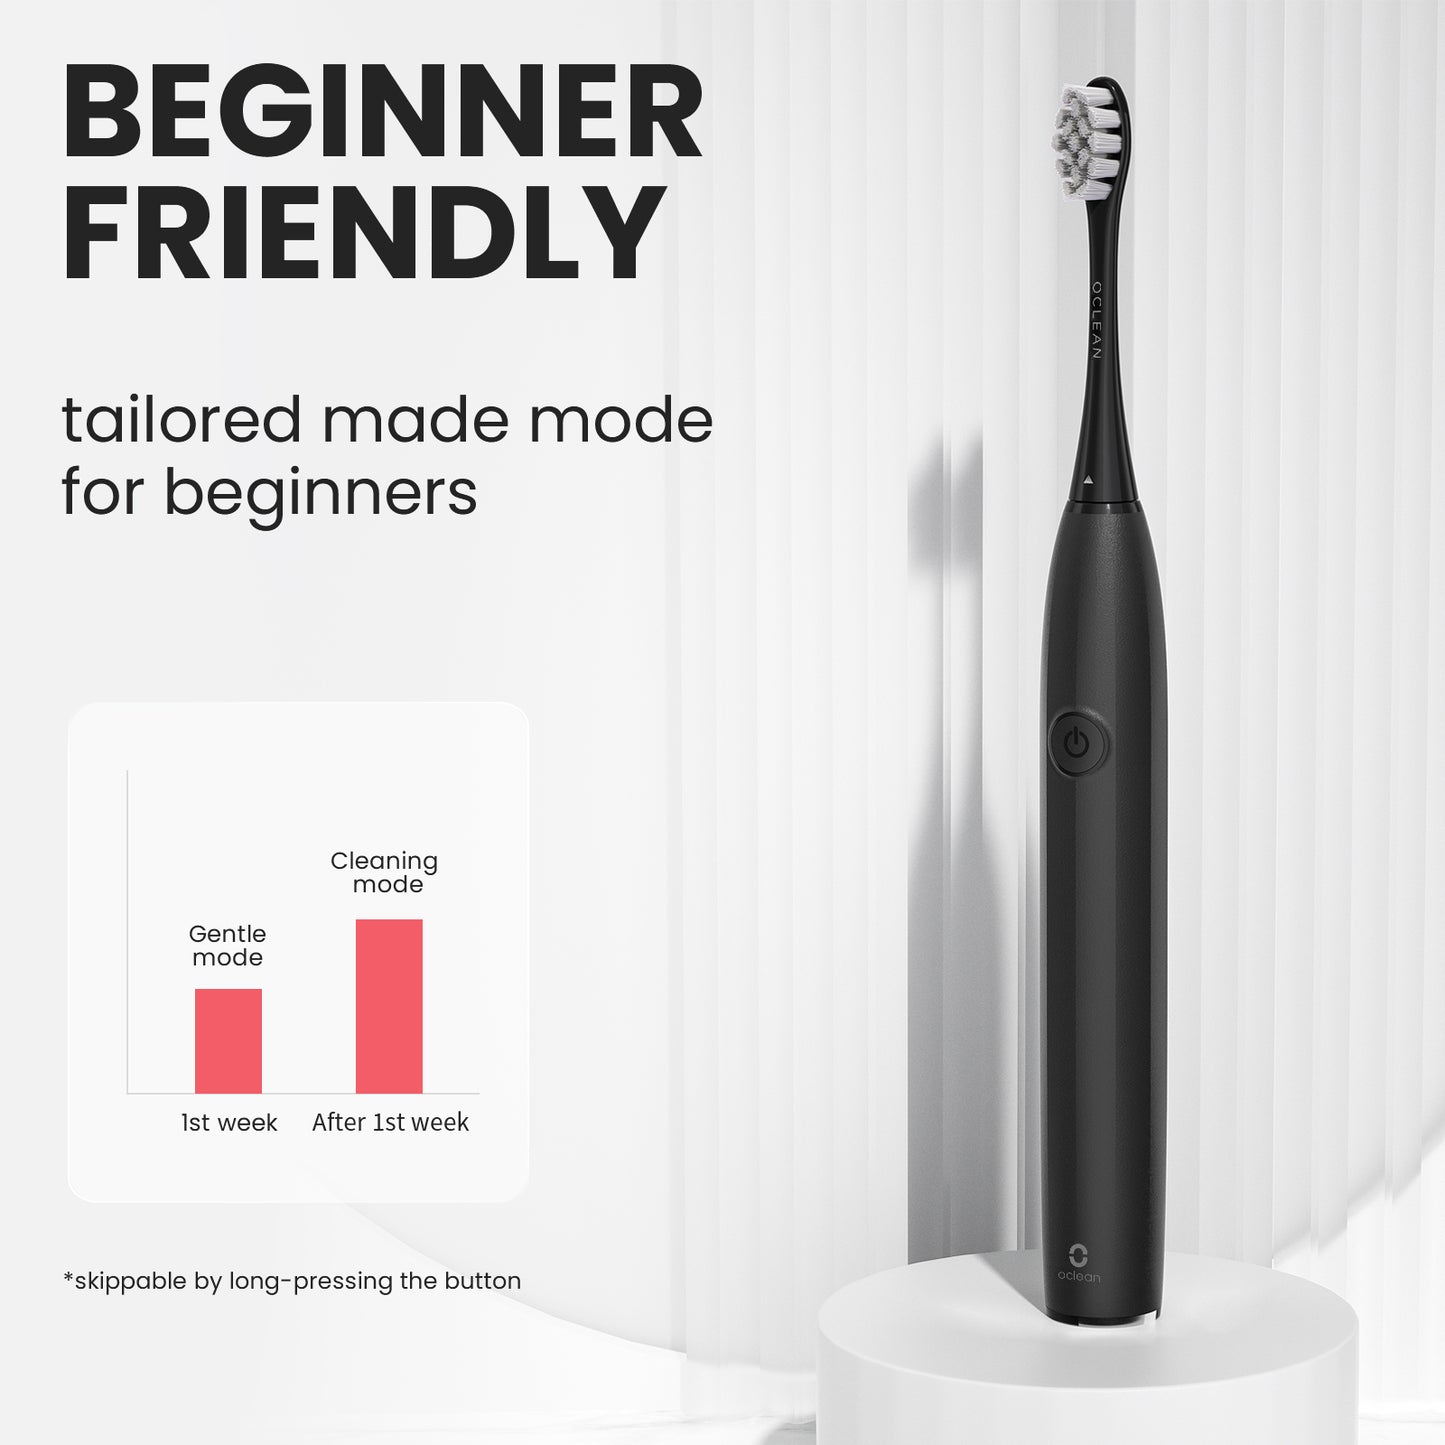 Oclean Endurance Sonic Electric Toothbrush-Toothbrushes-Oclean US Store